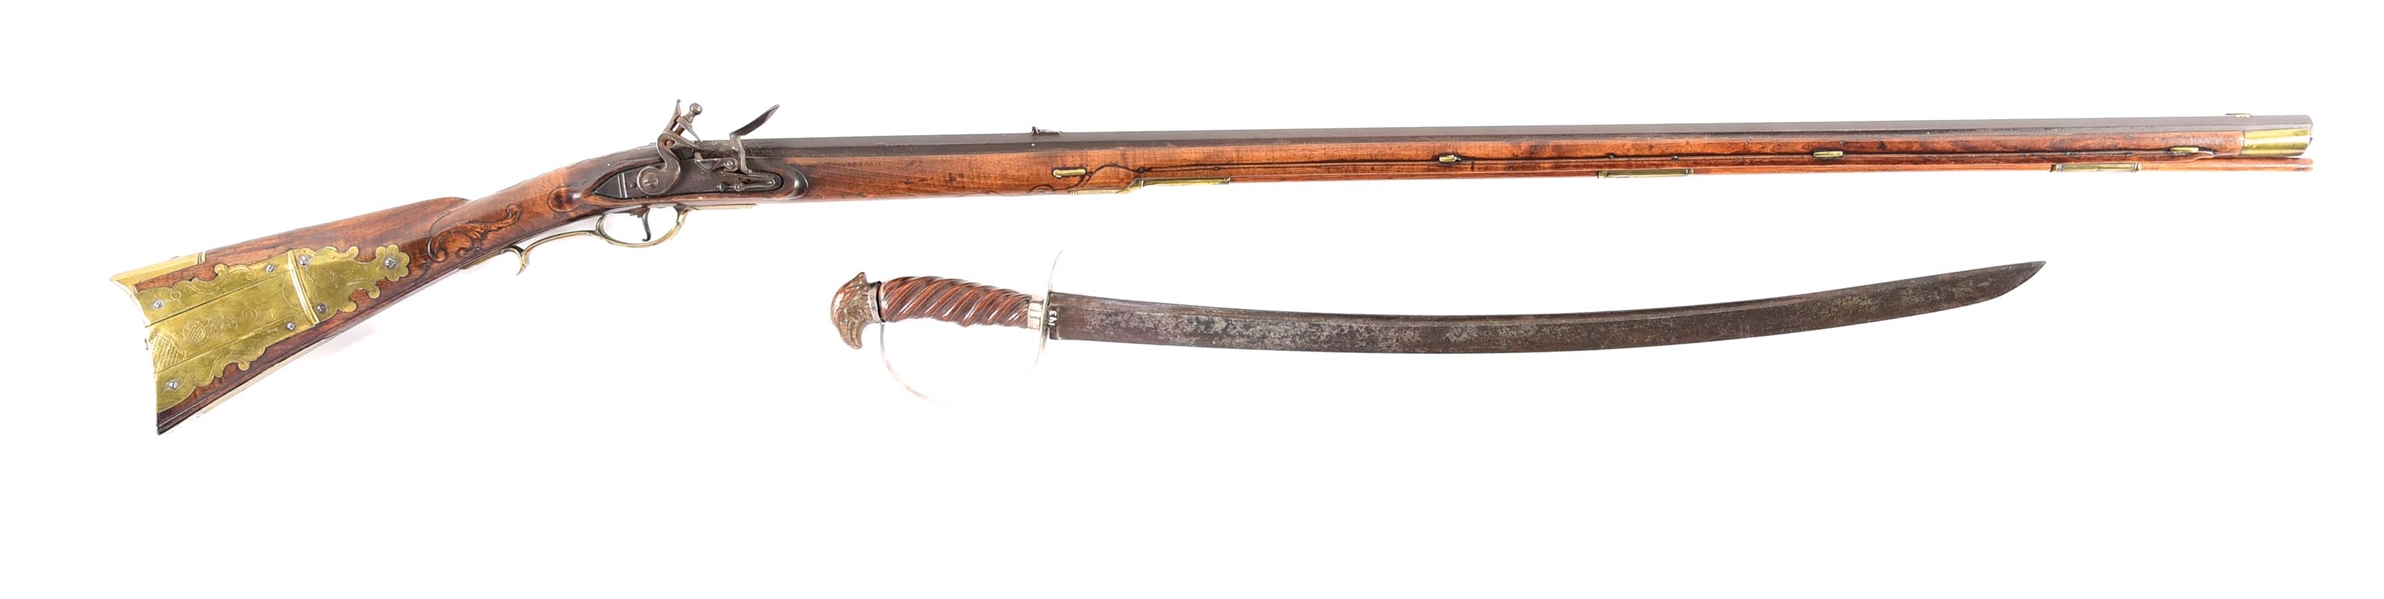 IMPORTANT KENTUCKY RIFLE AND EAGLE-HEAD SABER, BOTH BY JOHN NOLL.